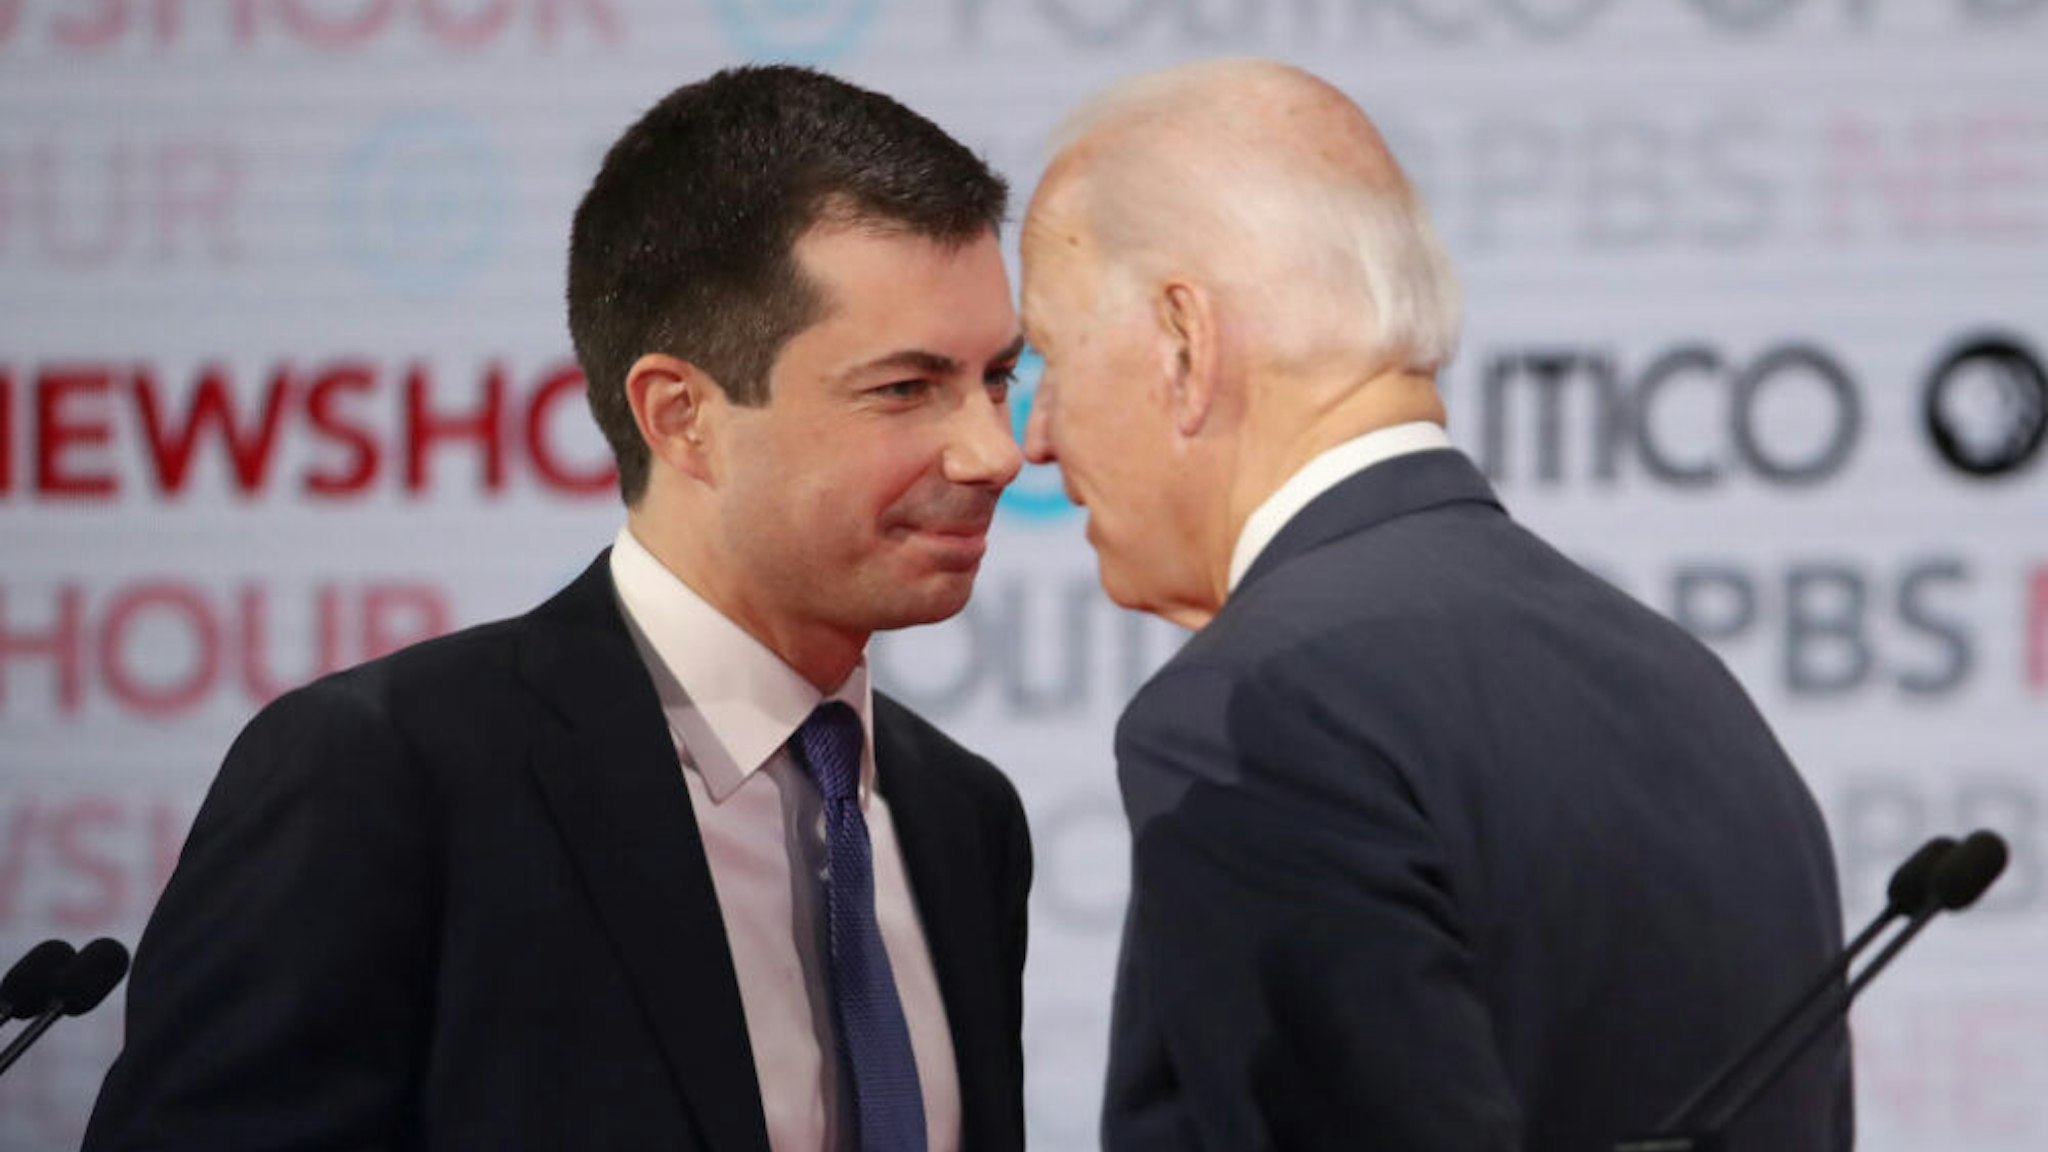 LOS ANGELES, CALIFORNIA - DECEMBER 19: Democratic presidential candidate South Bend, Indiana Mayor Pete Buttigieg (L) speaks with former Vice President Joe Biden during the Democratic presidential primary debate at Loyola Marymount University on December 19, 2019 in Los Angeles, California. Seven candidates out of the crowded field qualified for the 6th and last Democratic presidential primary debate of 2019 hosted by PBS NewsHour and Politico.